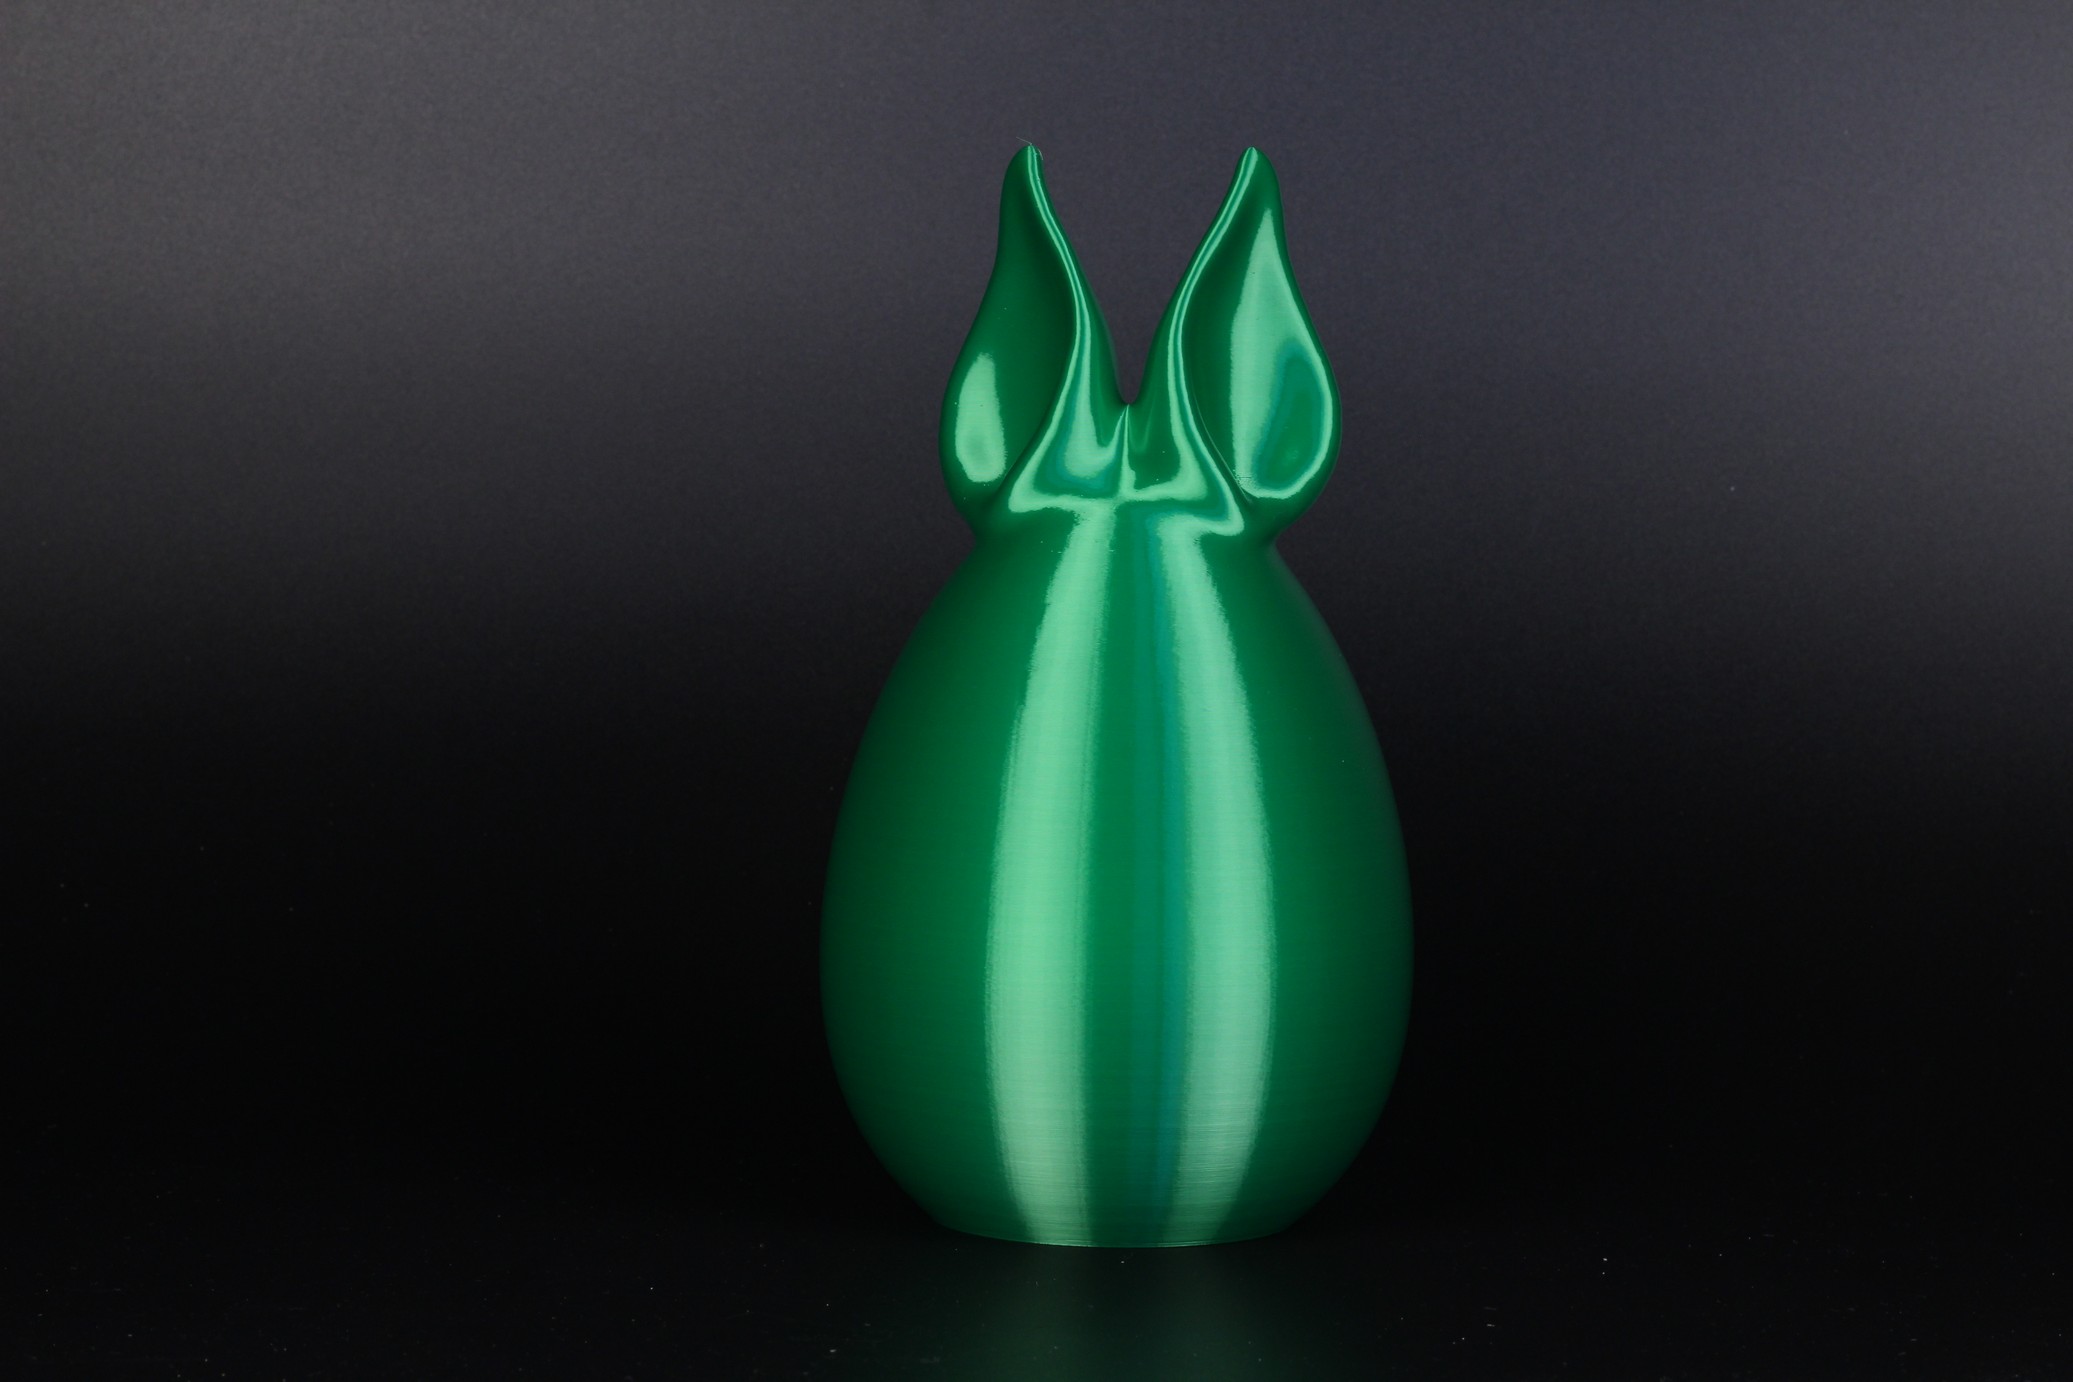 Egg with Ears Silk filament on Voron Trident 1 | VORON Trident FYSETC Kit Review: Is it worth it?